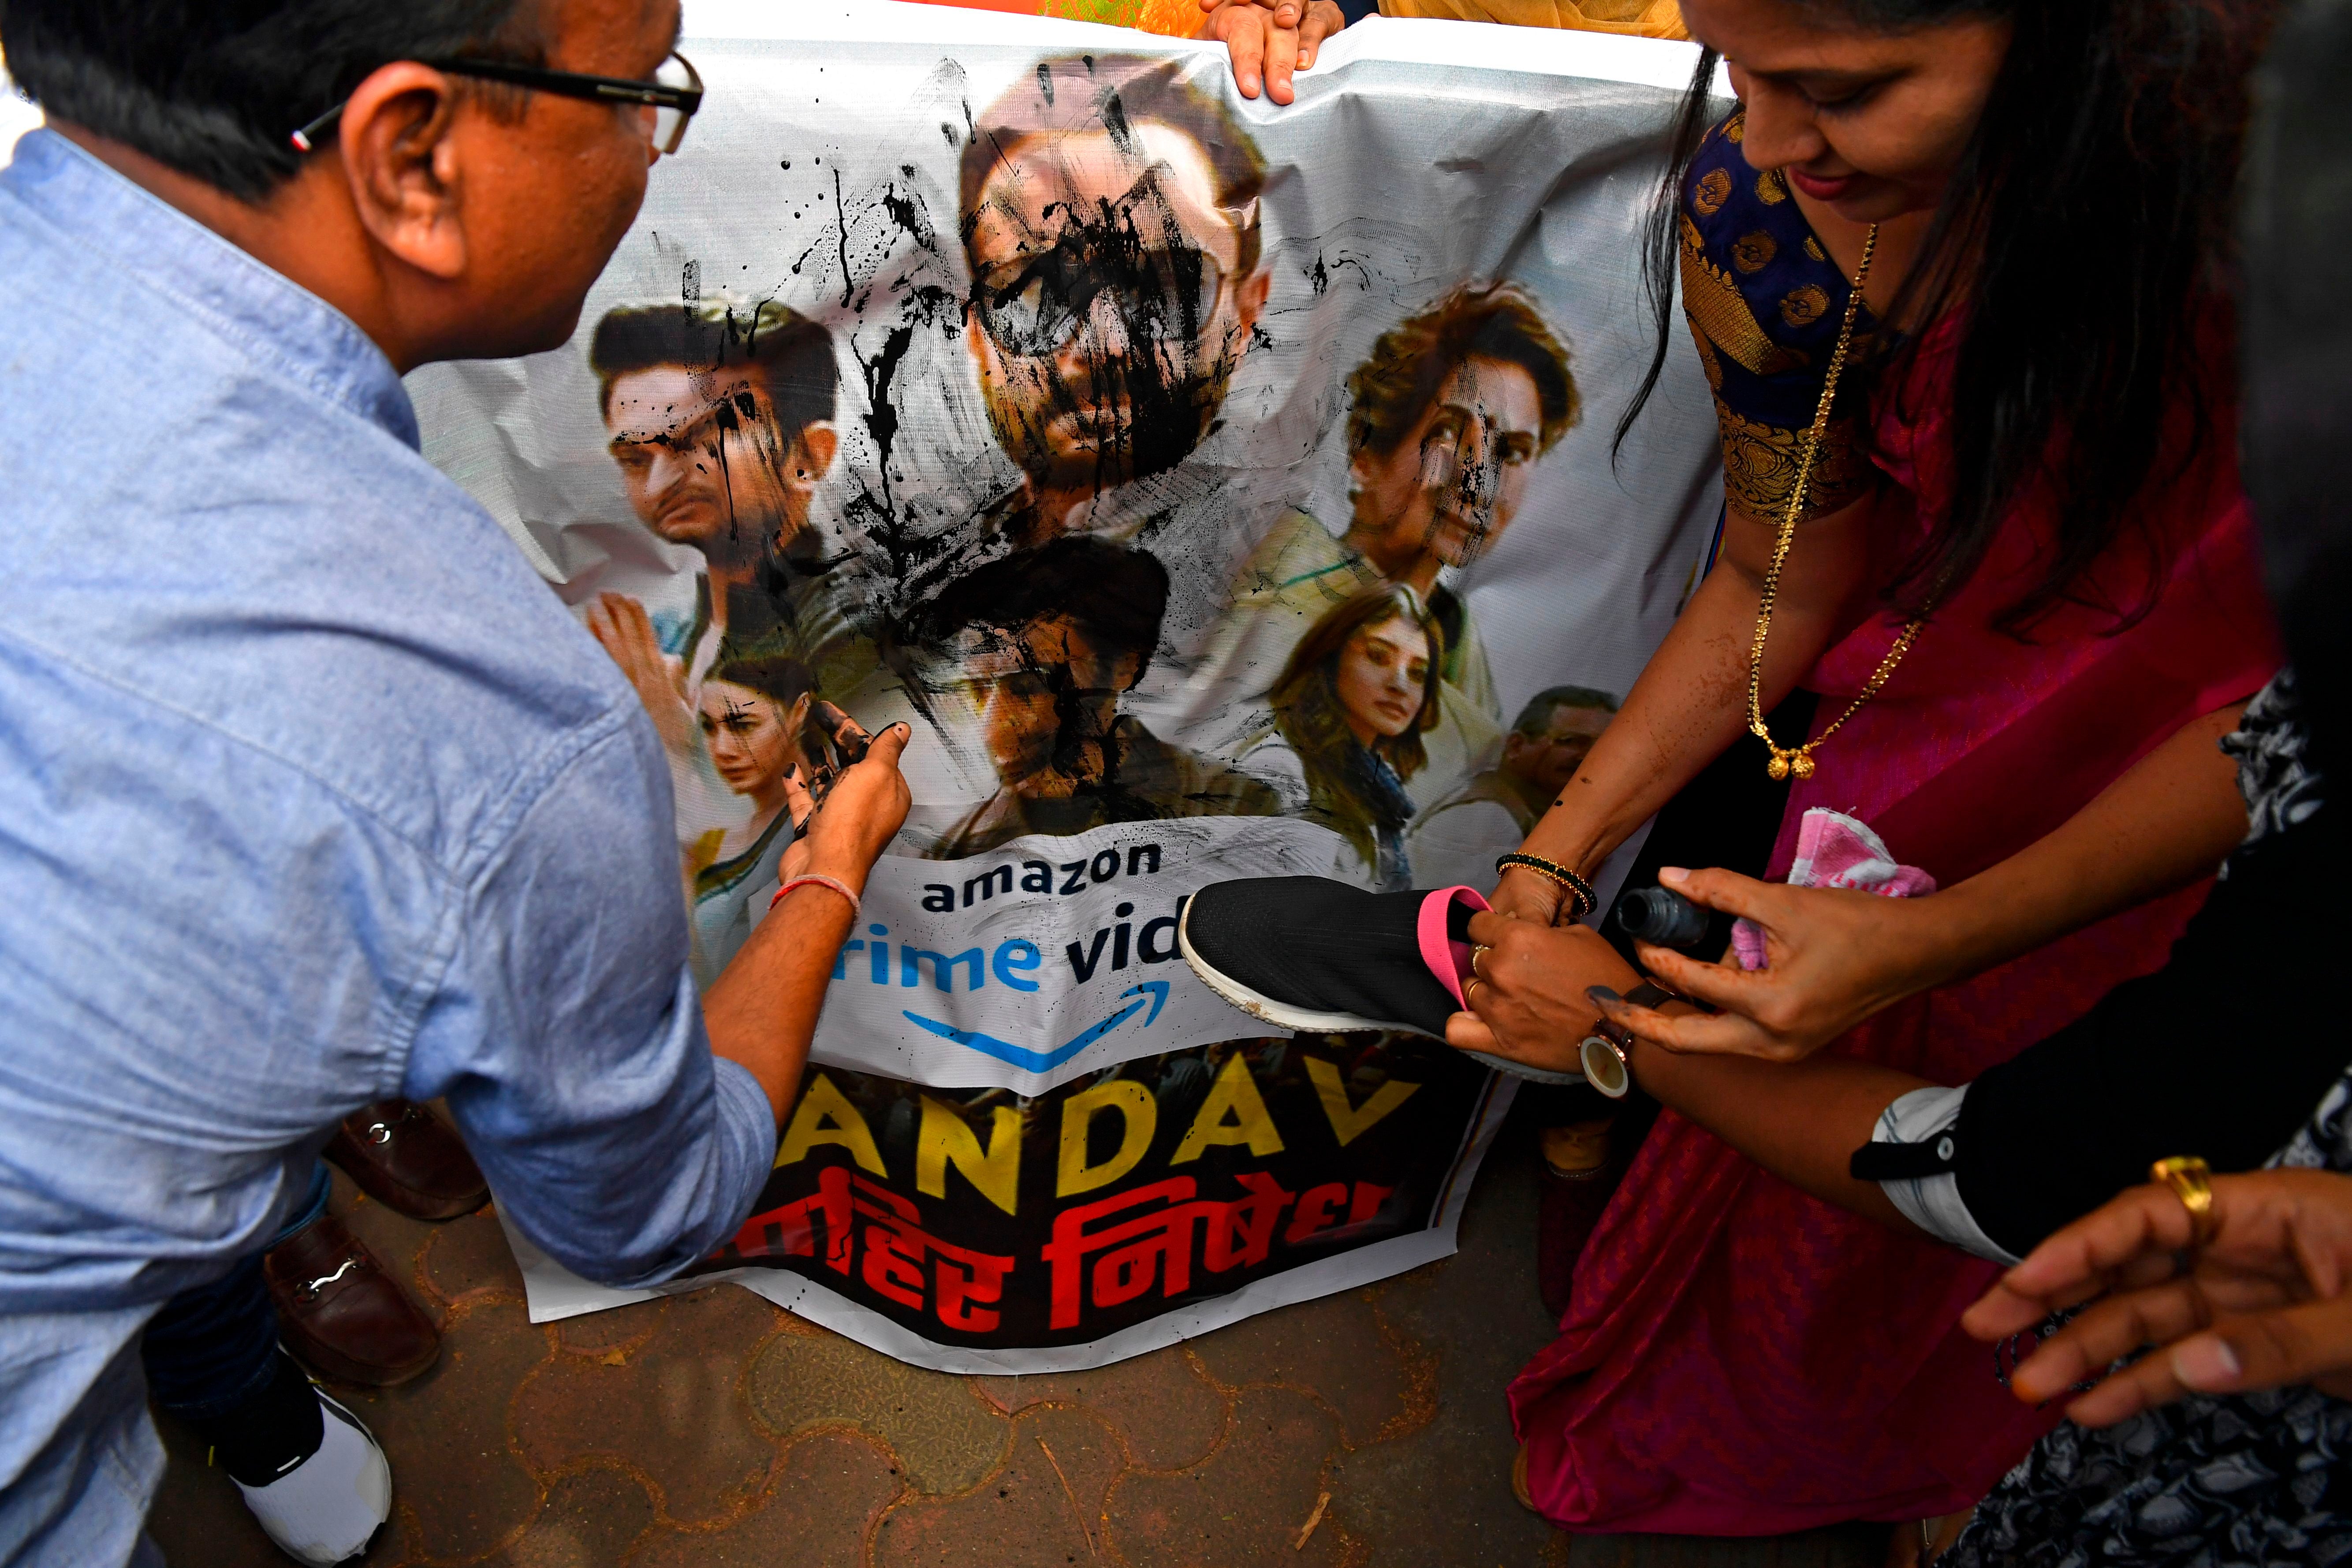 Supporters of India's ruling Bharatiya Janata Party (BJP) pour ink and beat a poster with footwear during a protest against a new web series 'Tandav', in Mumbai on 18 January 2021